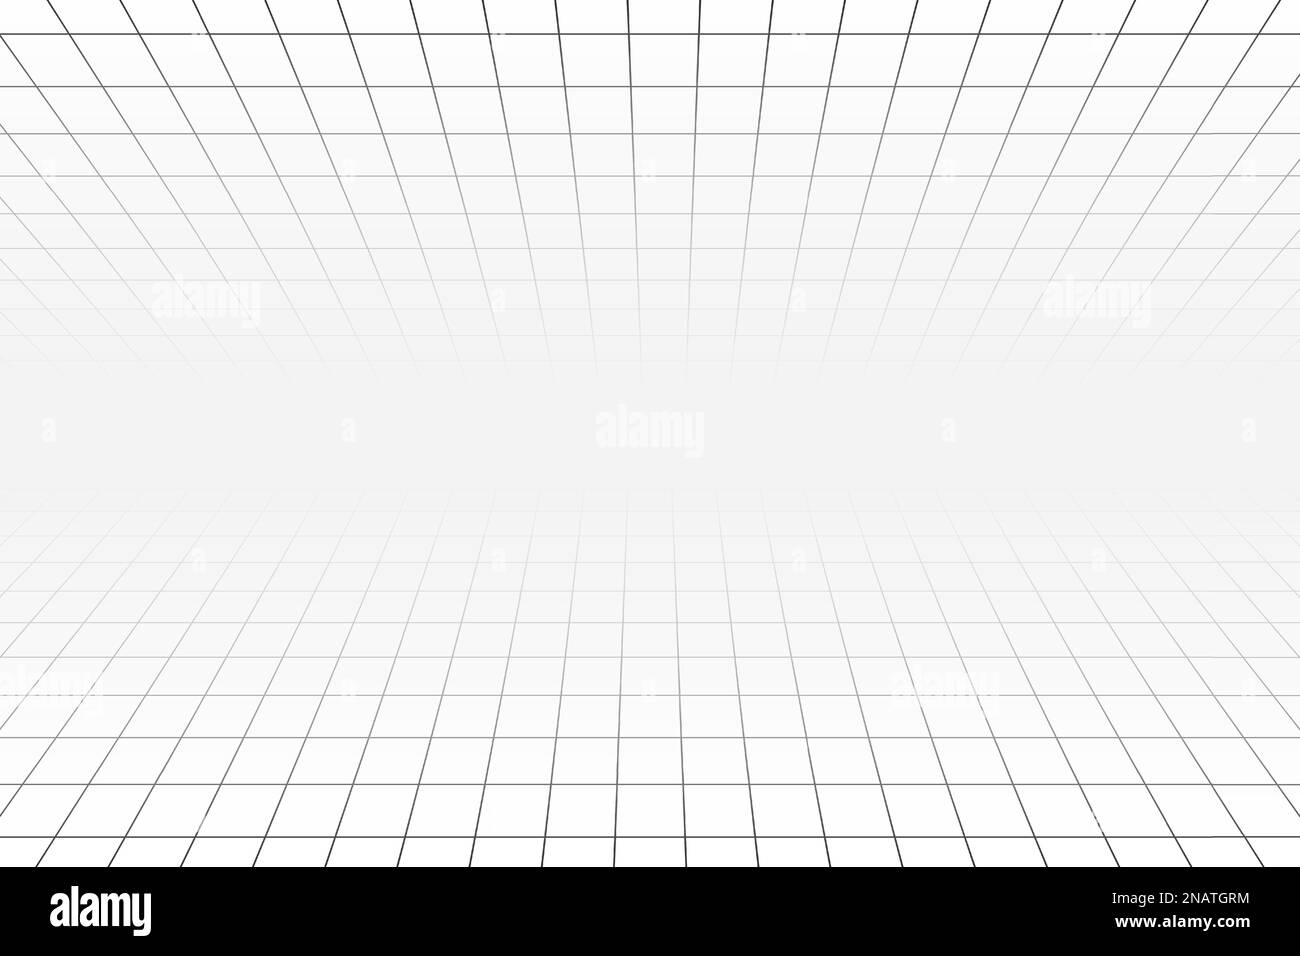 Horizontal Infinity Perspective Grids Top And Bottom Tile Floor And